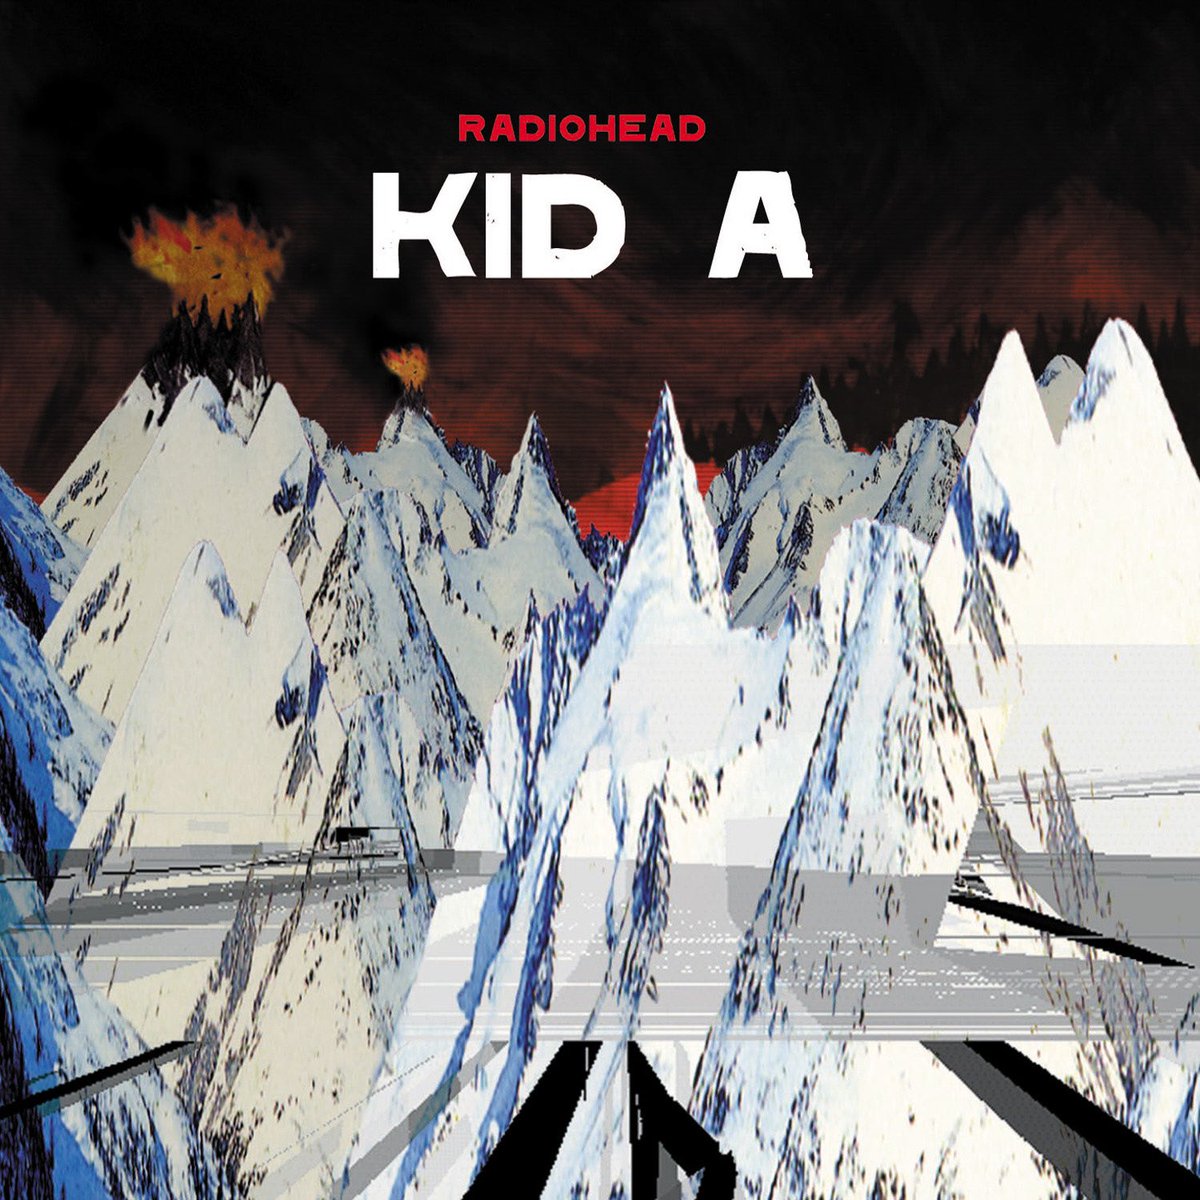 2000AOTY: Radiohead - Kid A#2: PJ Harvey - Stories from the City, Stories from the Sea#3: The Avalanches - Since I Left You#4: Ulver - Perdition CityTotal: 35